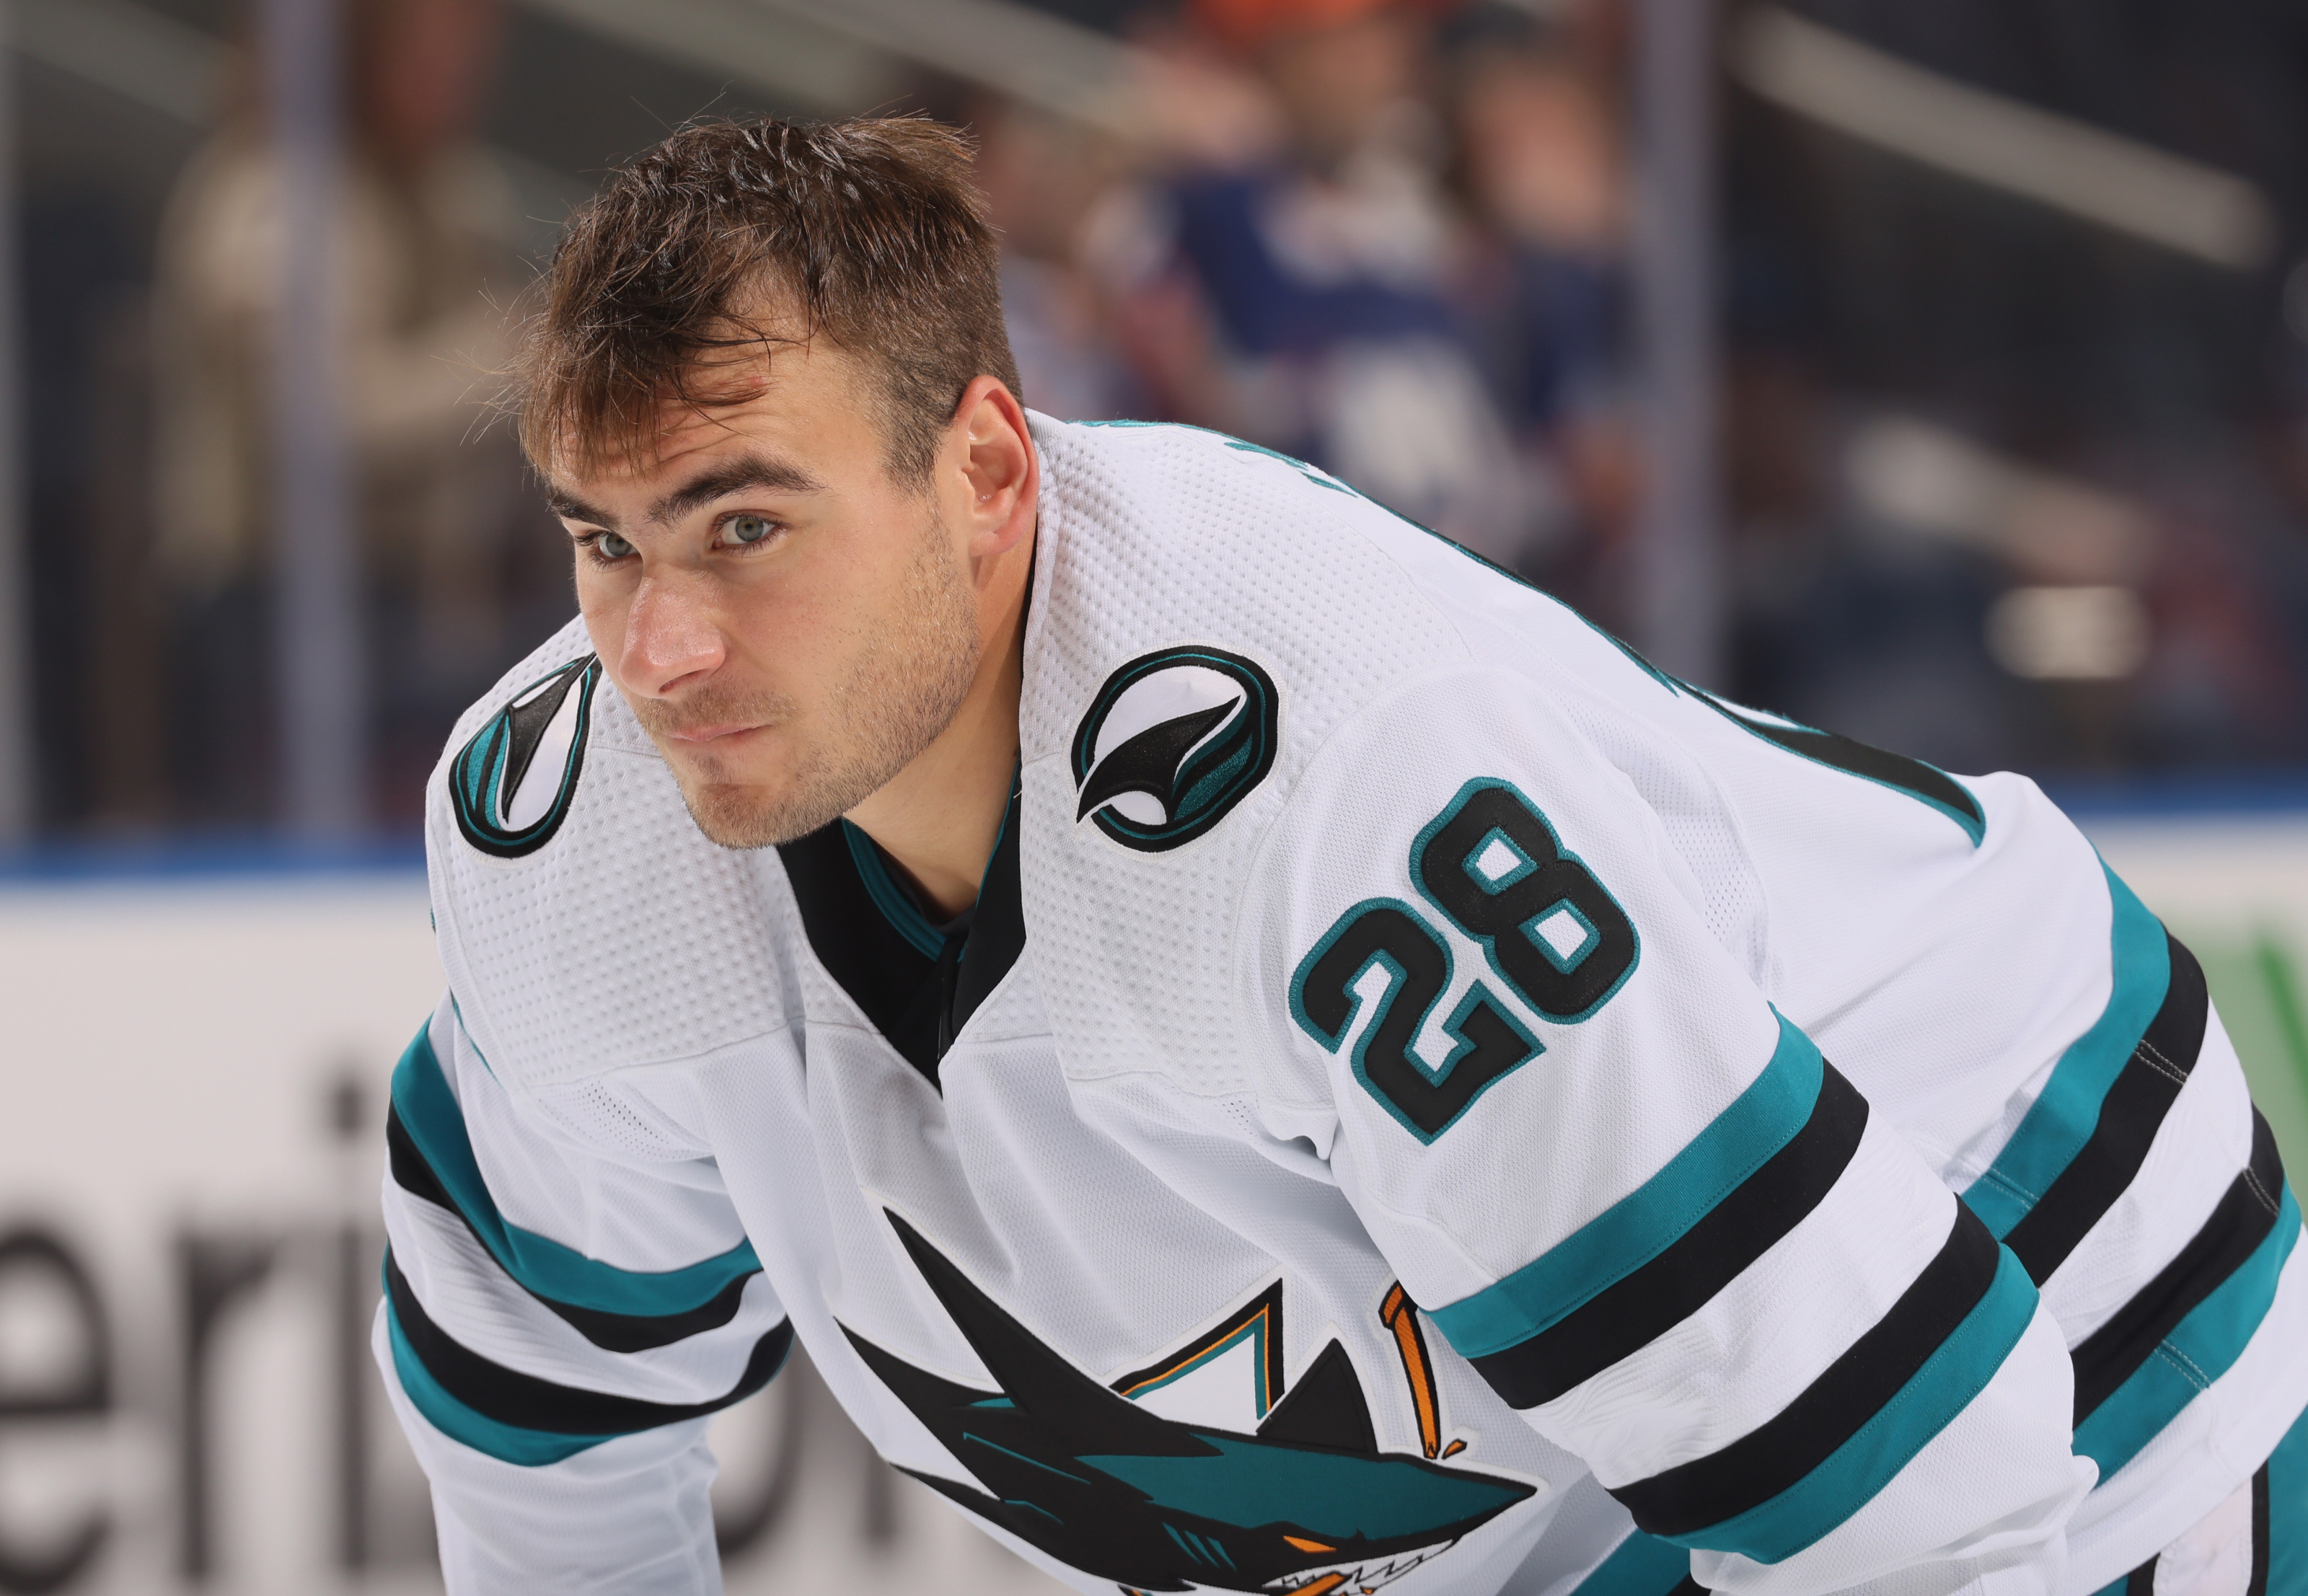 Devils File Team-Elected Arbitration with Timo Meier - New Jersey Hockey Now